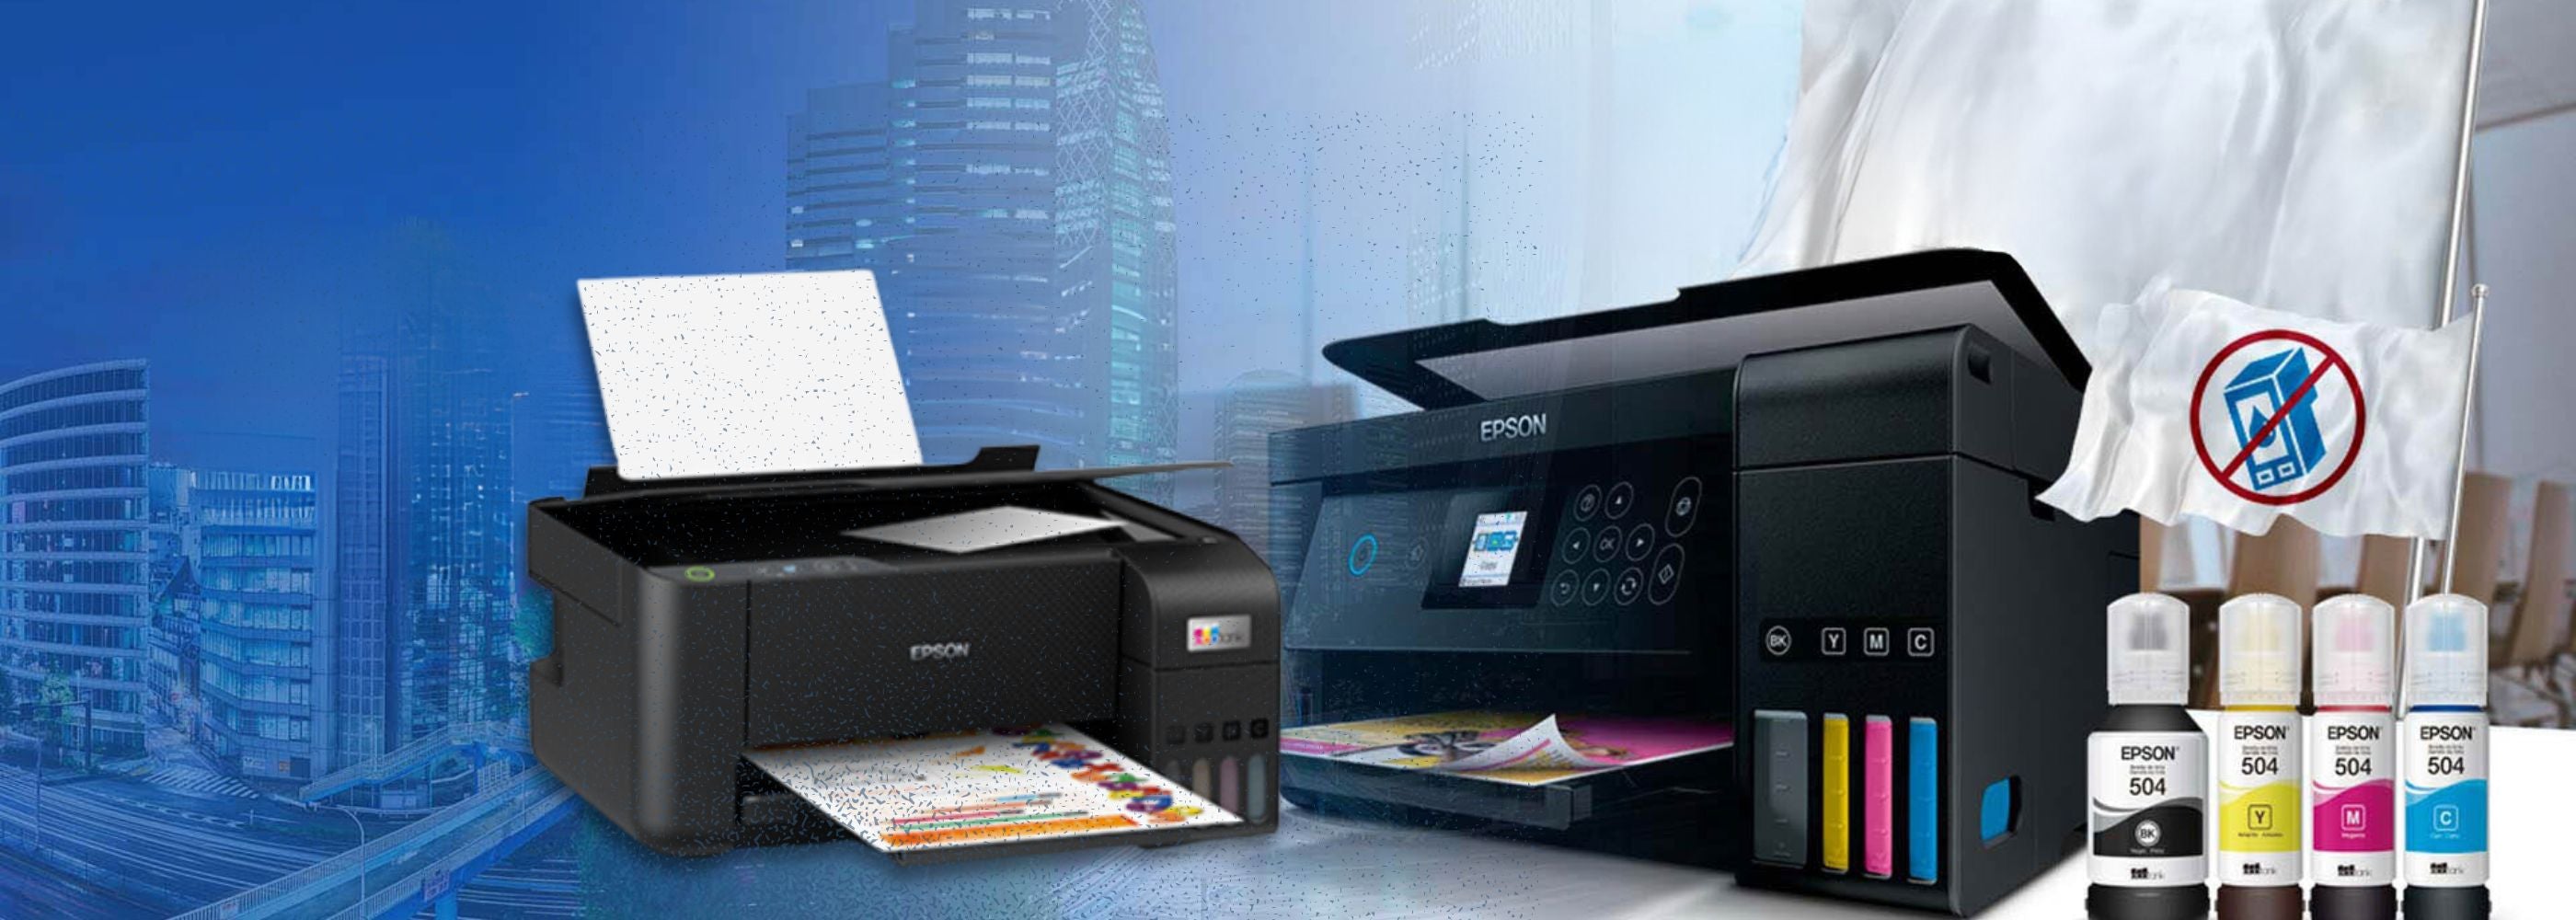 Epson_banner_page